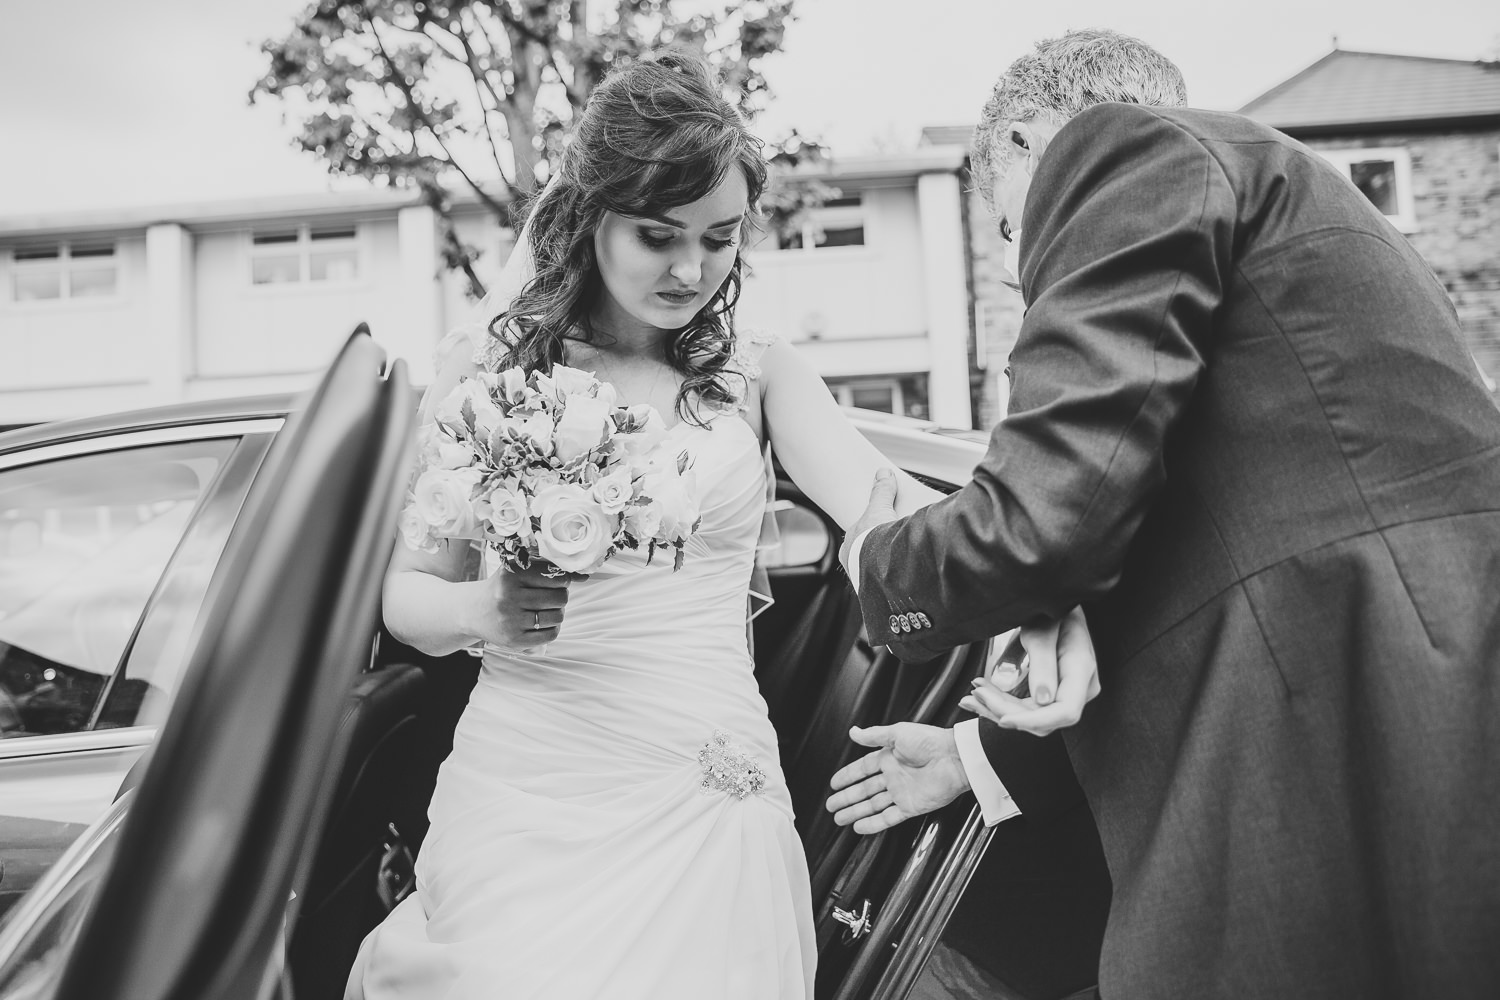 Black and white wedding photo of bride arriving for her wedding day, getting out of the car